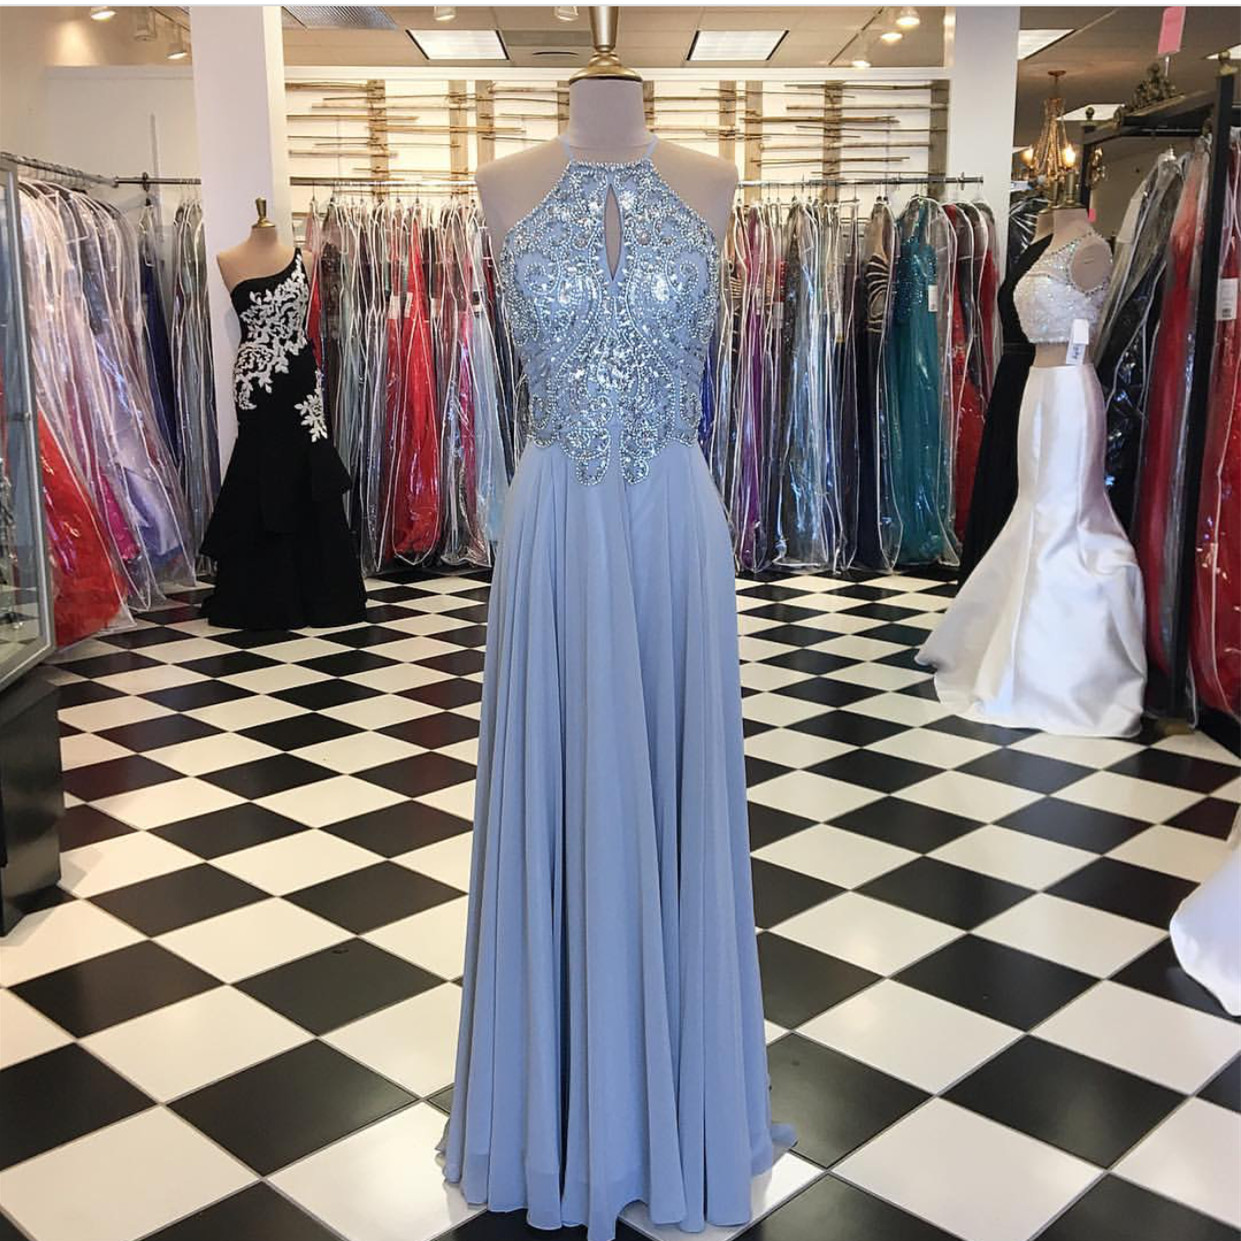 Silver Prom Dress,chiffon Prom Dress,beaded Prom Gowns,long Formal Evening Dresses,prom Dresses 2017